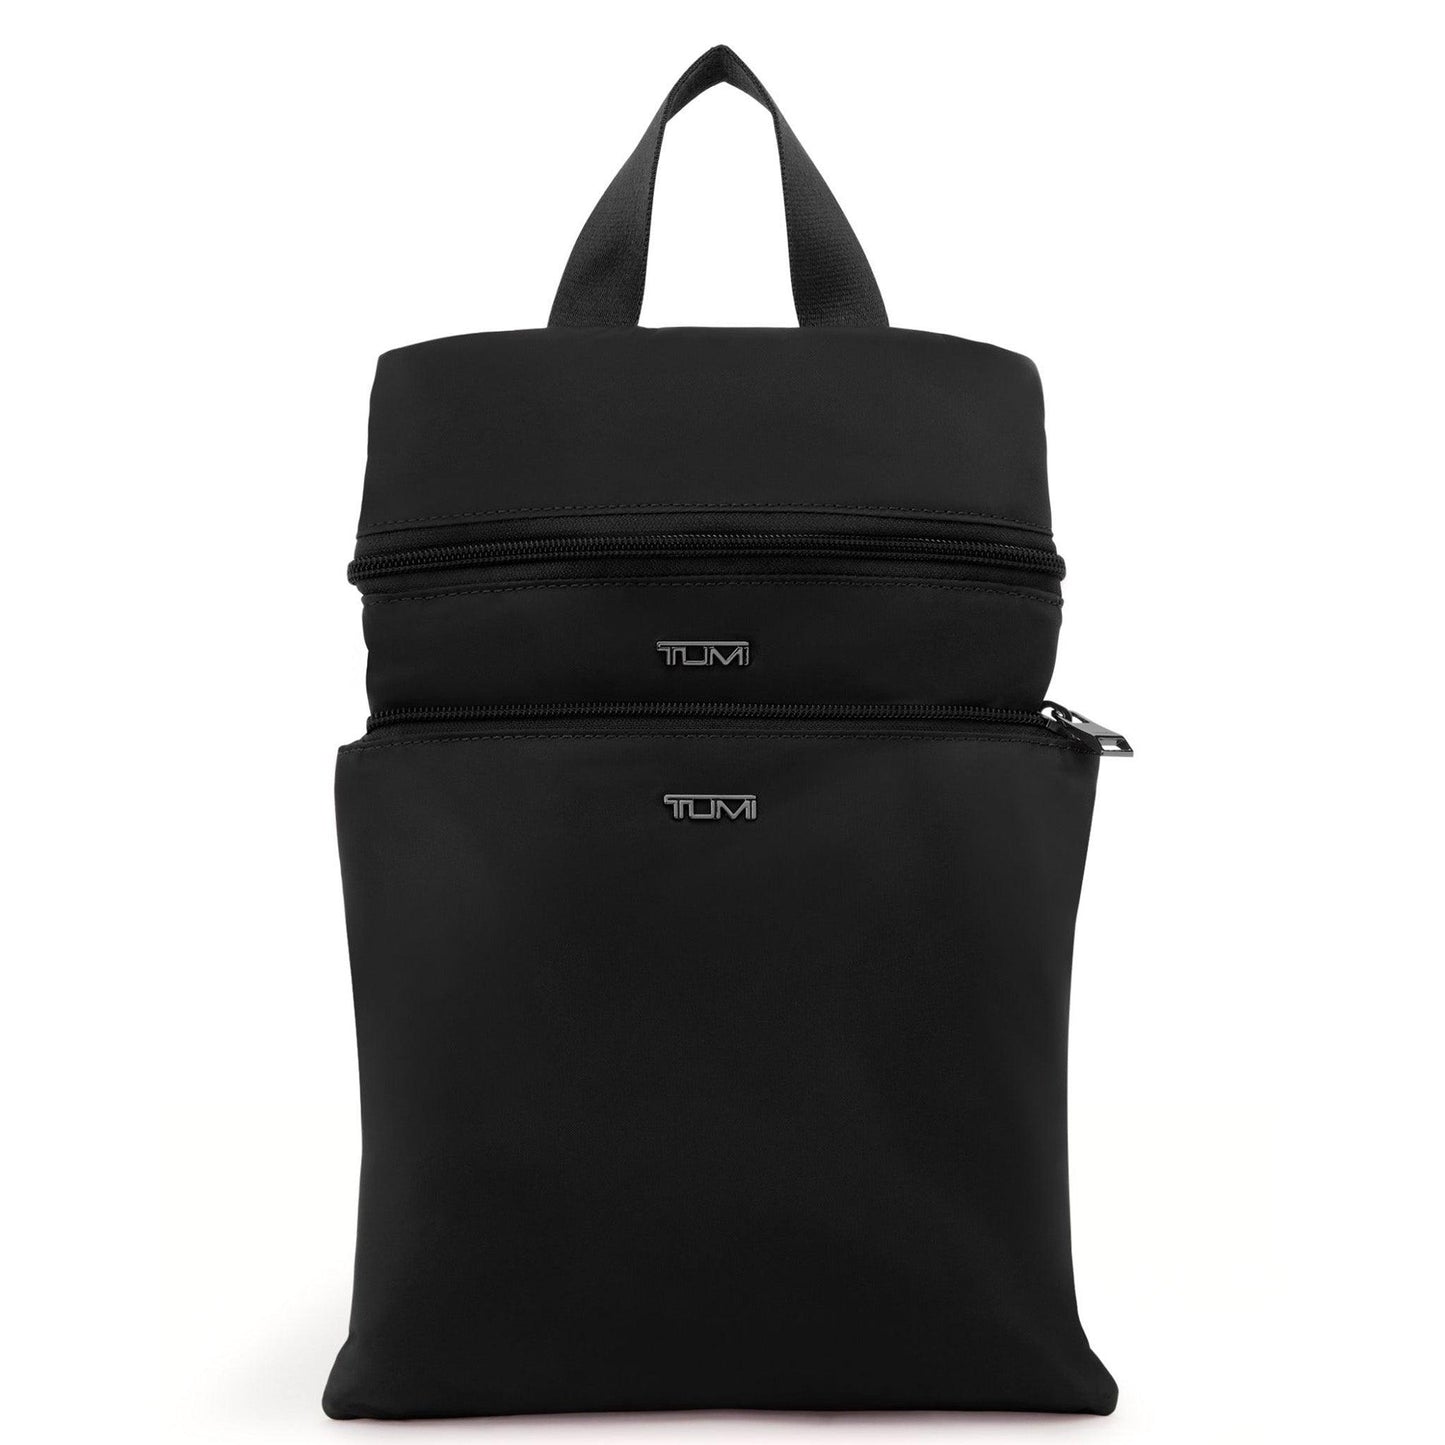 Just In Case® Backpack - Black/Gunmetal - Cosmos Boutique New Jersey